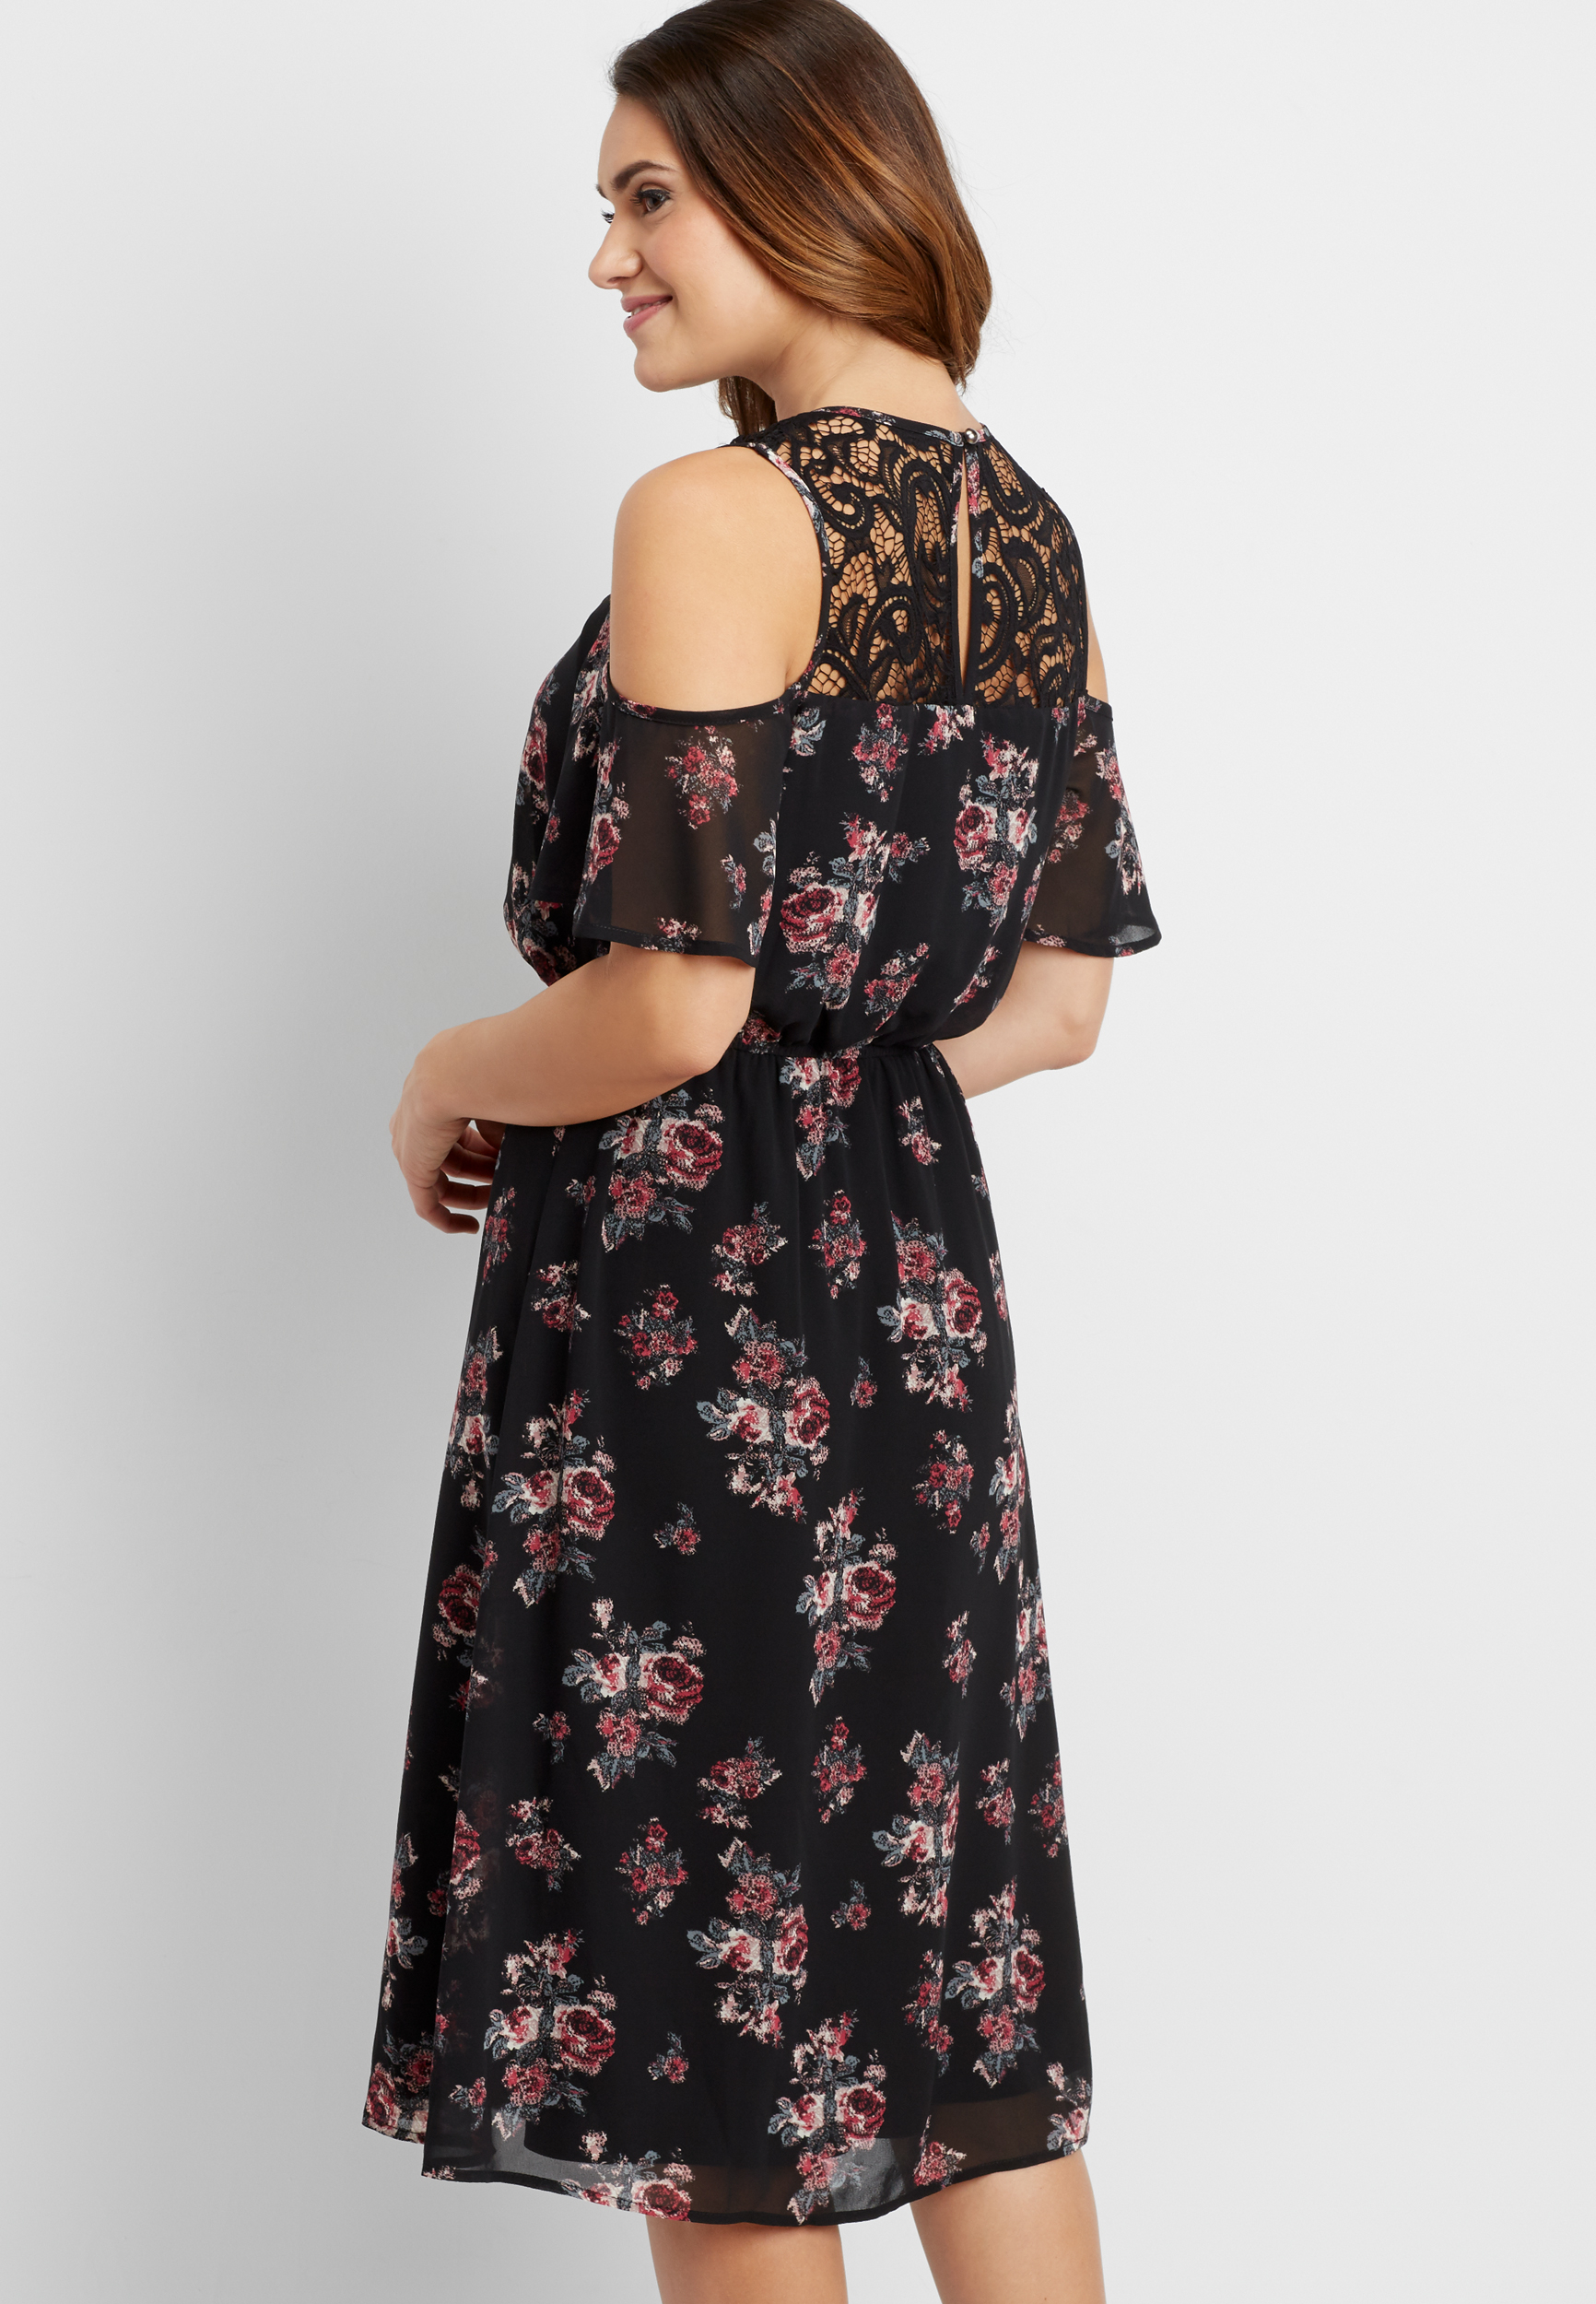 floral print chiffon midi dress with lace and cold shoulders